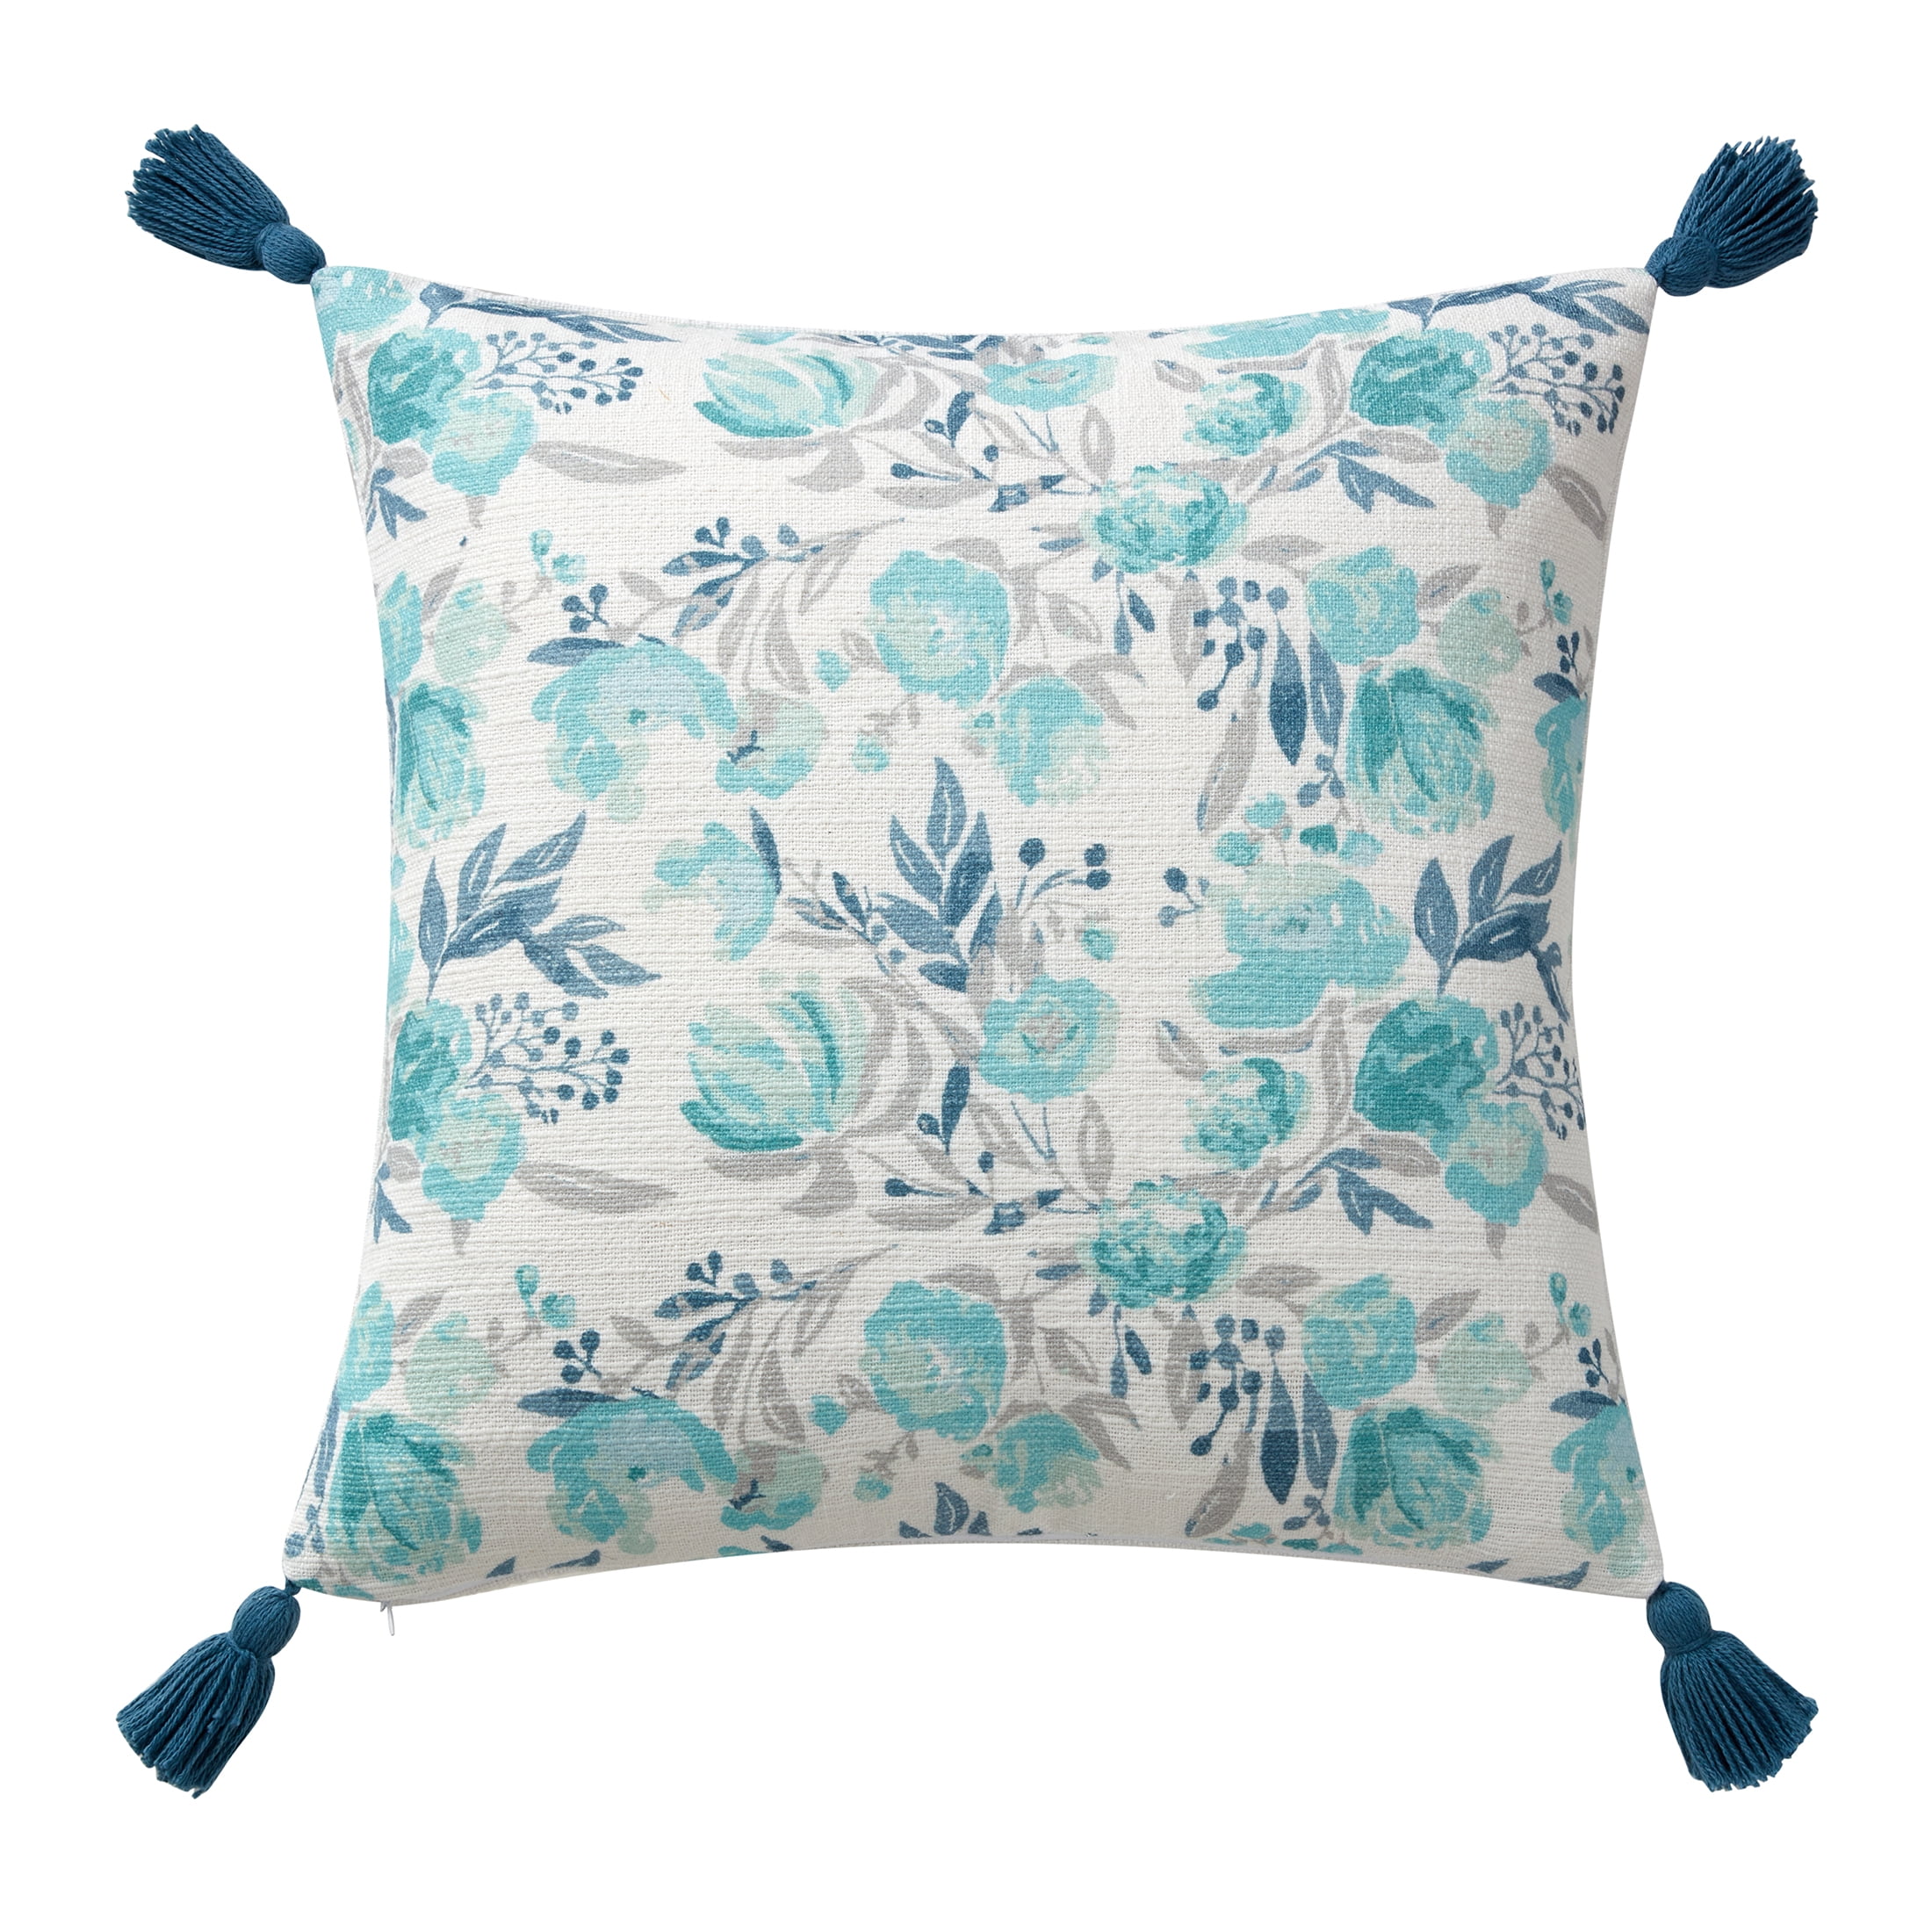 Throw Pillow. Blue Pillow Cover. 18 X 18 Inch. Free Shipping. Cover Only.  Featuring a Crown Design. 